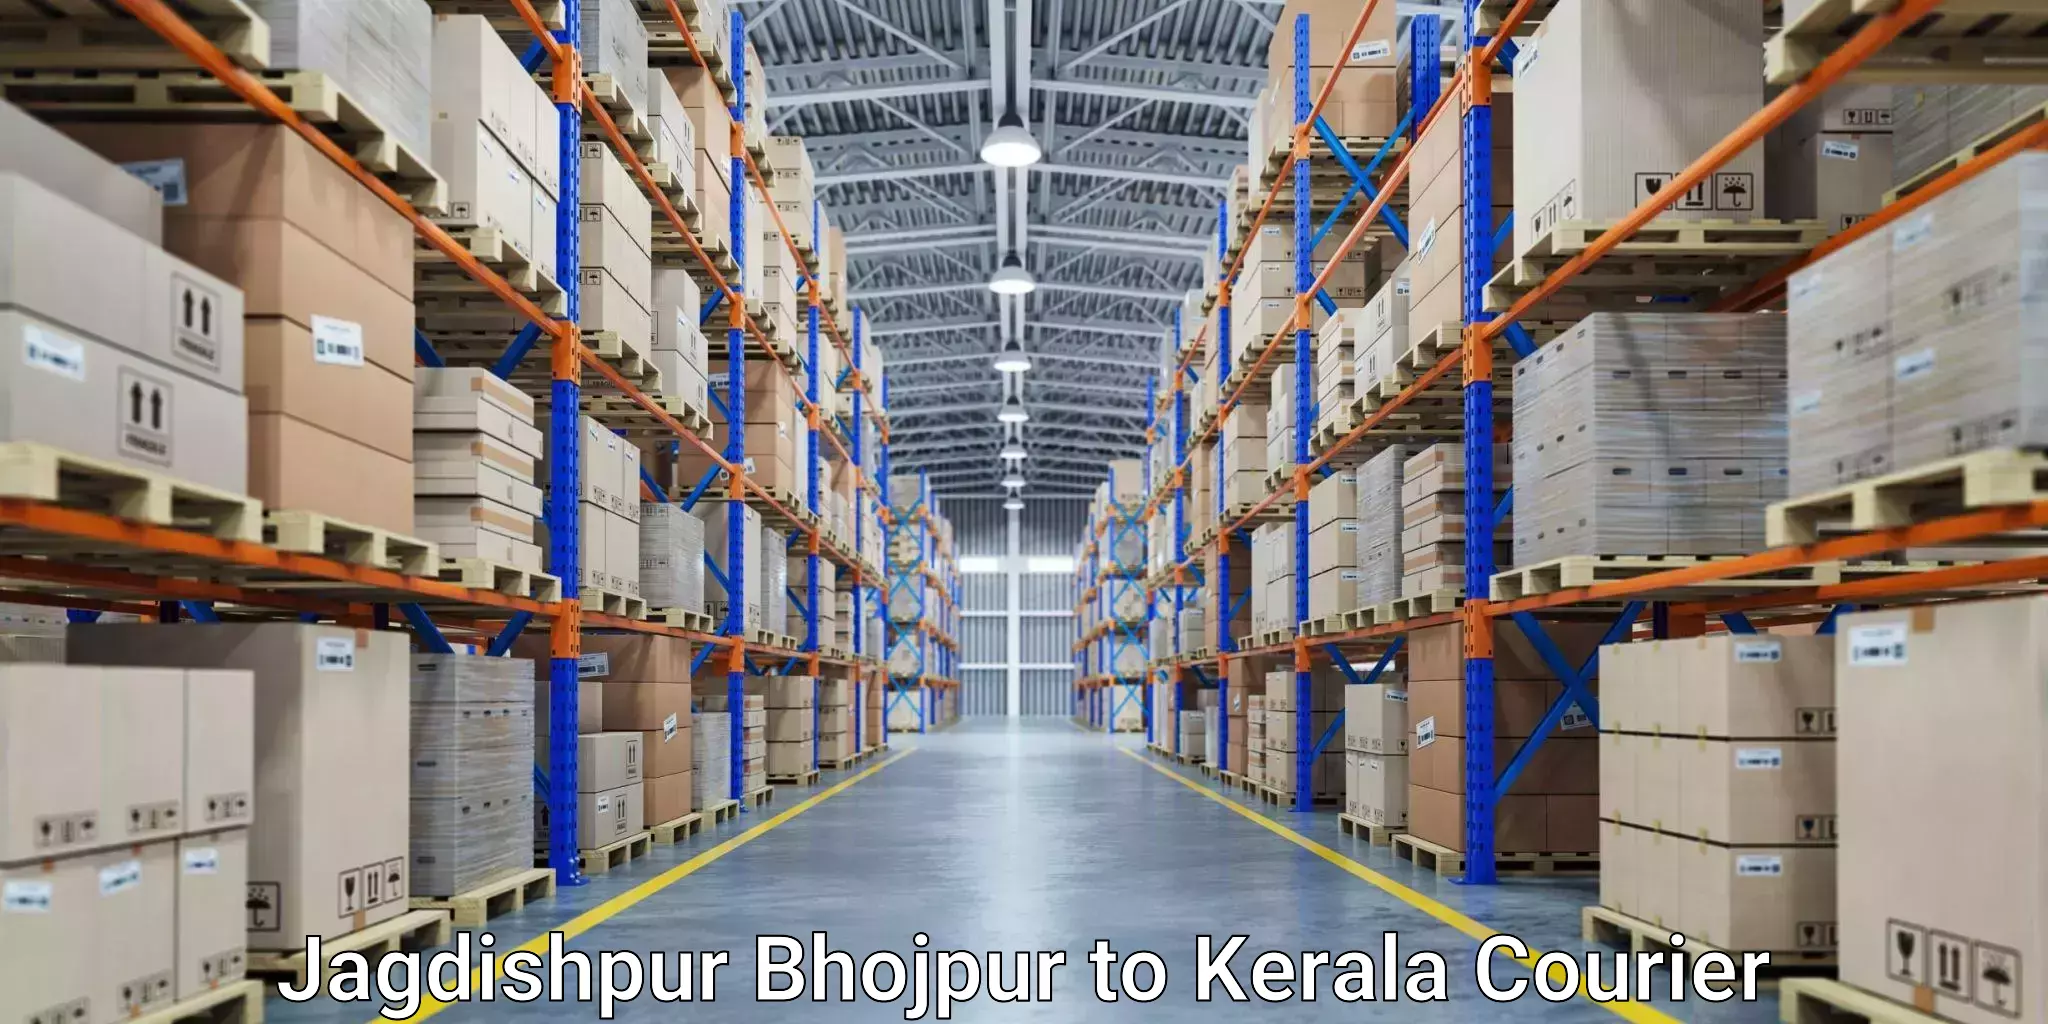 Flexible delivery schedules Jagdishpur Bhojpur to Kerala